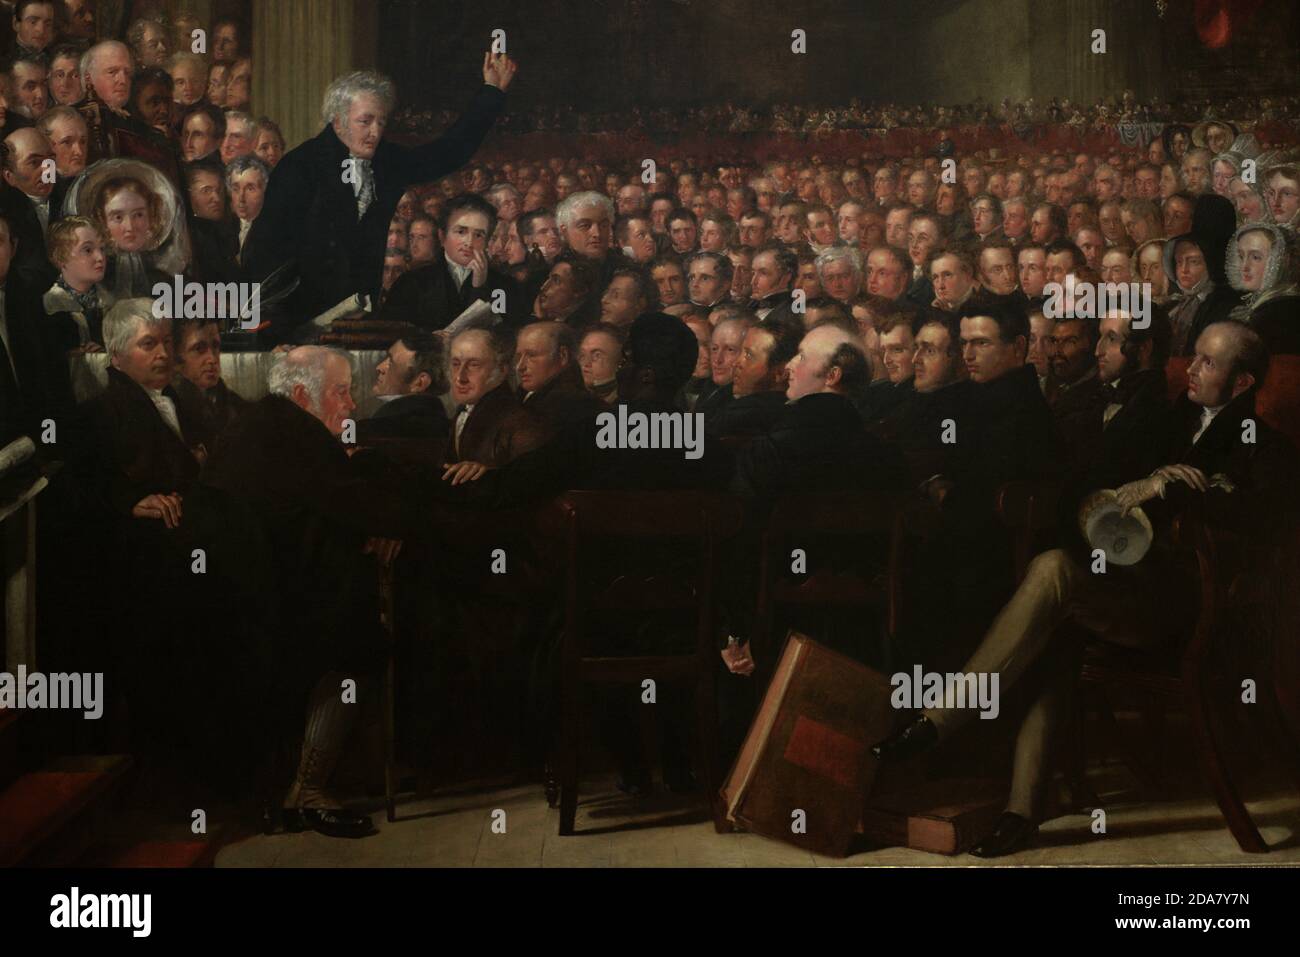 The Anti-Slavery Society Convention, 1840. Painting by Benjamin Robert Haydon (1786-1846). Oil on canvas (297,2 x 383,6 cm), 1841. Detail. This painting depicts the 1840 convention of the British and Foreign Anti-Slavery Society (BFASS), founded to promote worldwide abolition. Thomas Clarkson (1760-1846), President of the Convention, addresses the meeting of the delegates. National Portrait Gallery. London, England, United Kingdom. Stock Photo